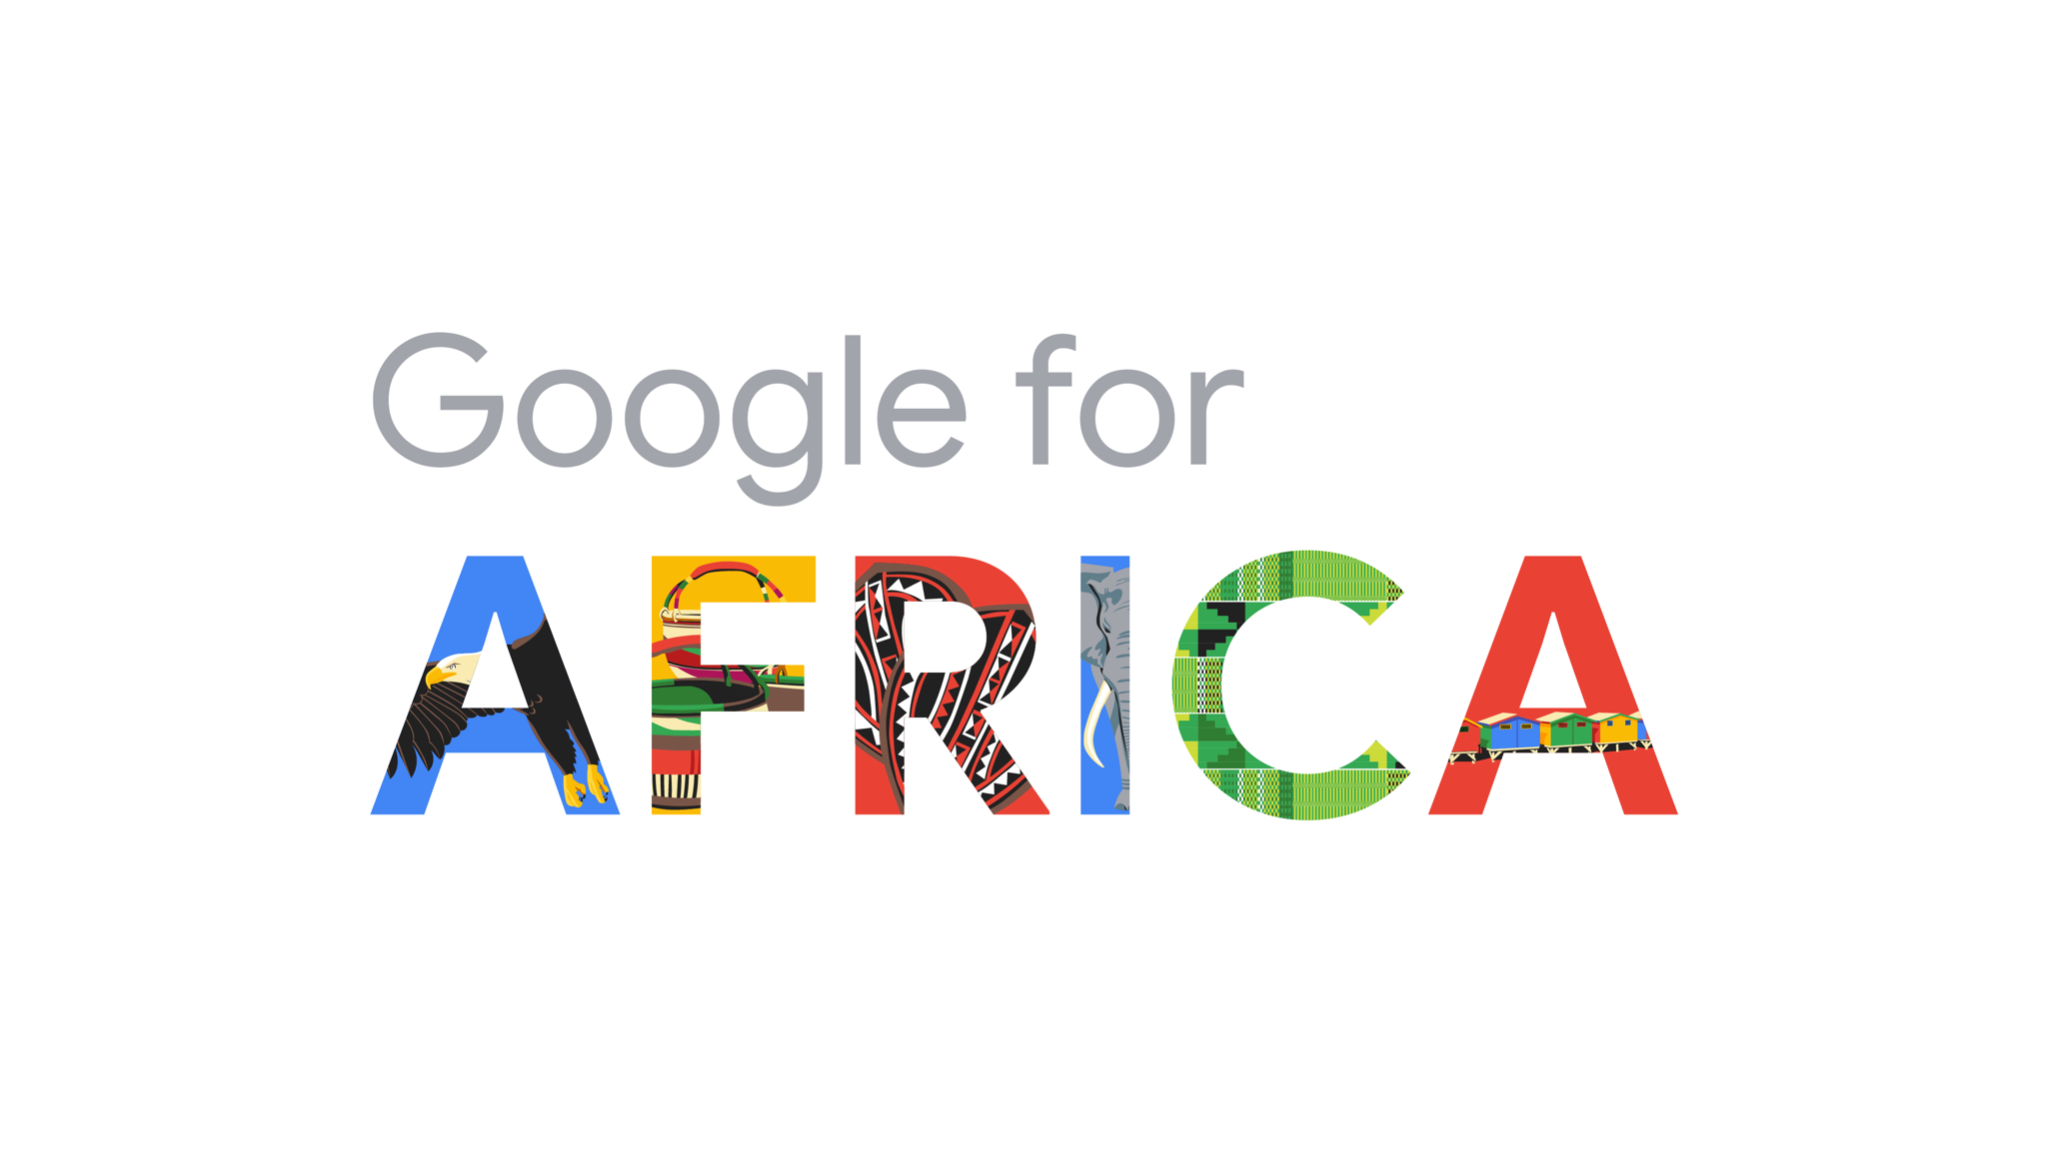 Google To Invest $1 Billion To Support Digital Transformation In Africa